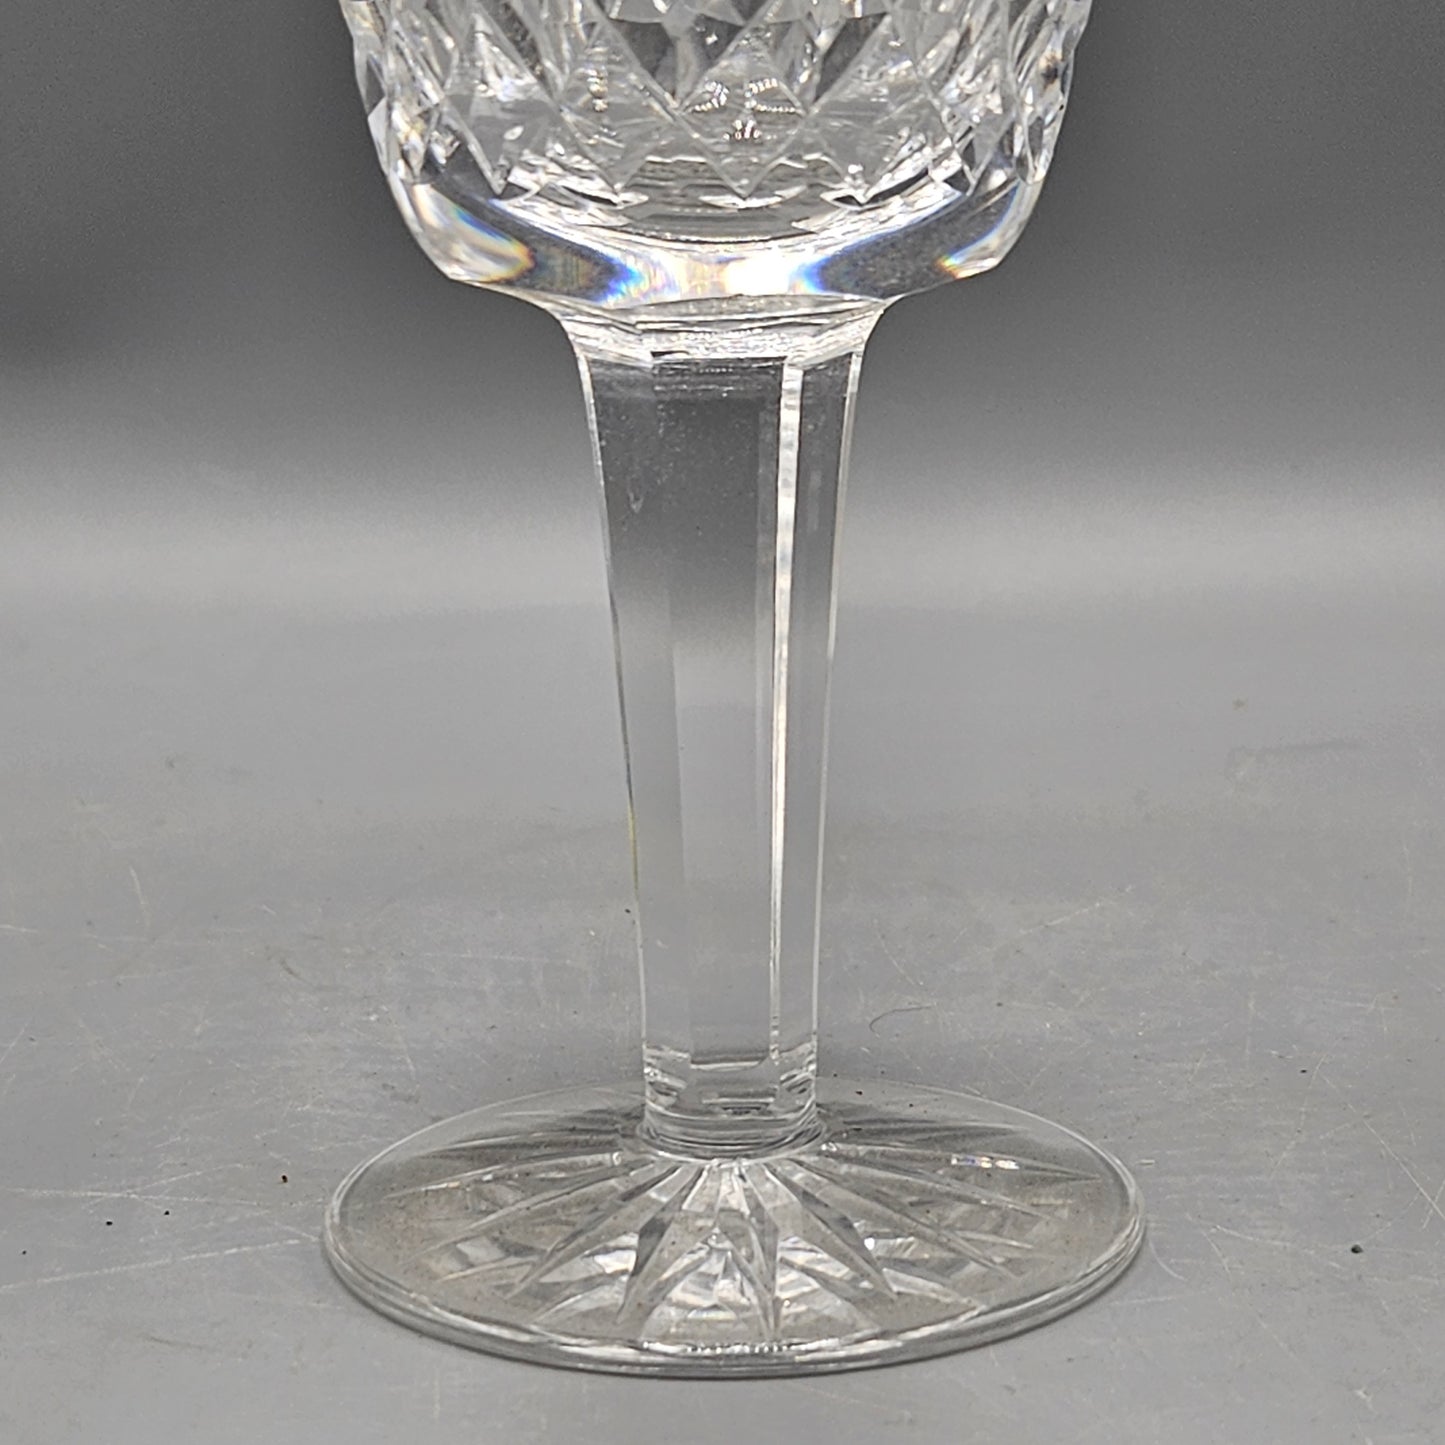 Waterford Crystal Lismore Claret Wine Glass (6 Available)